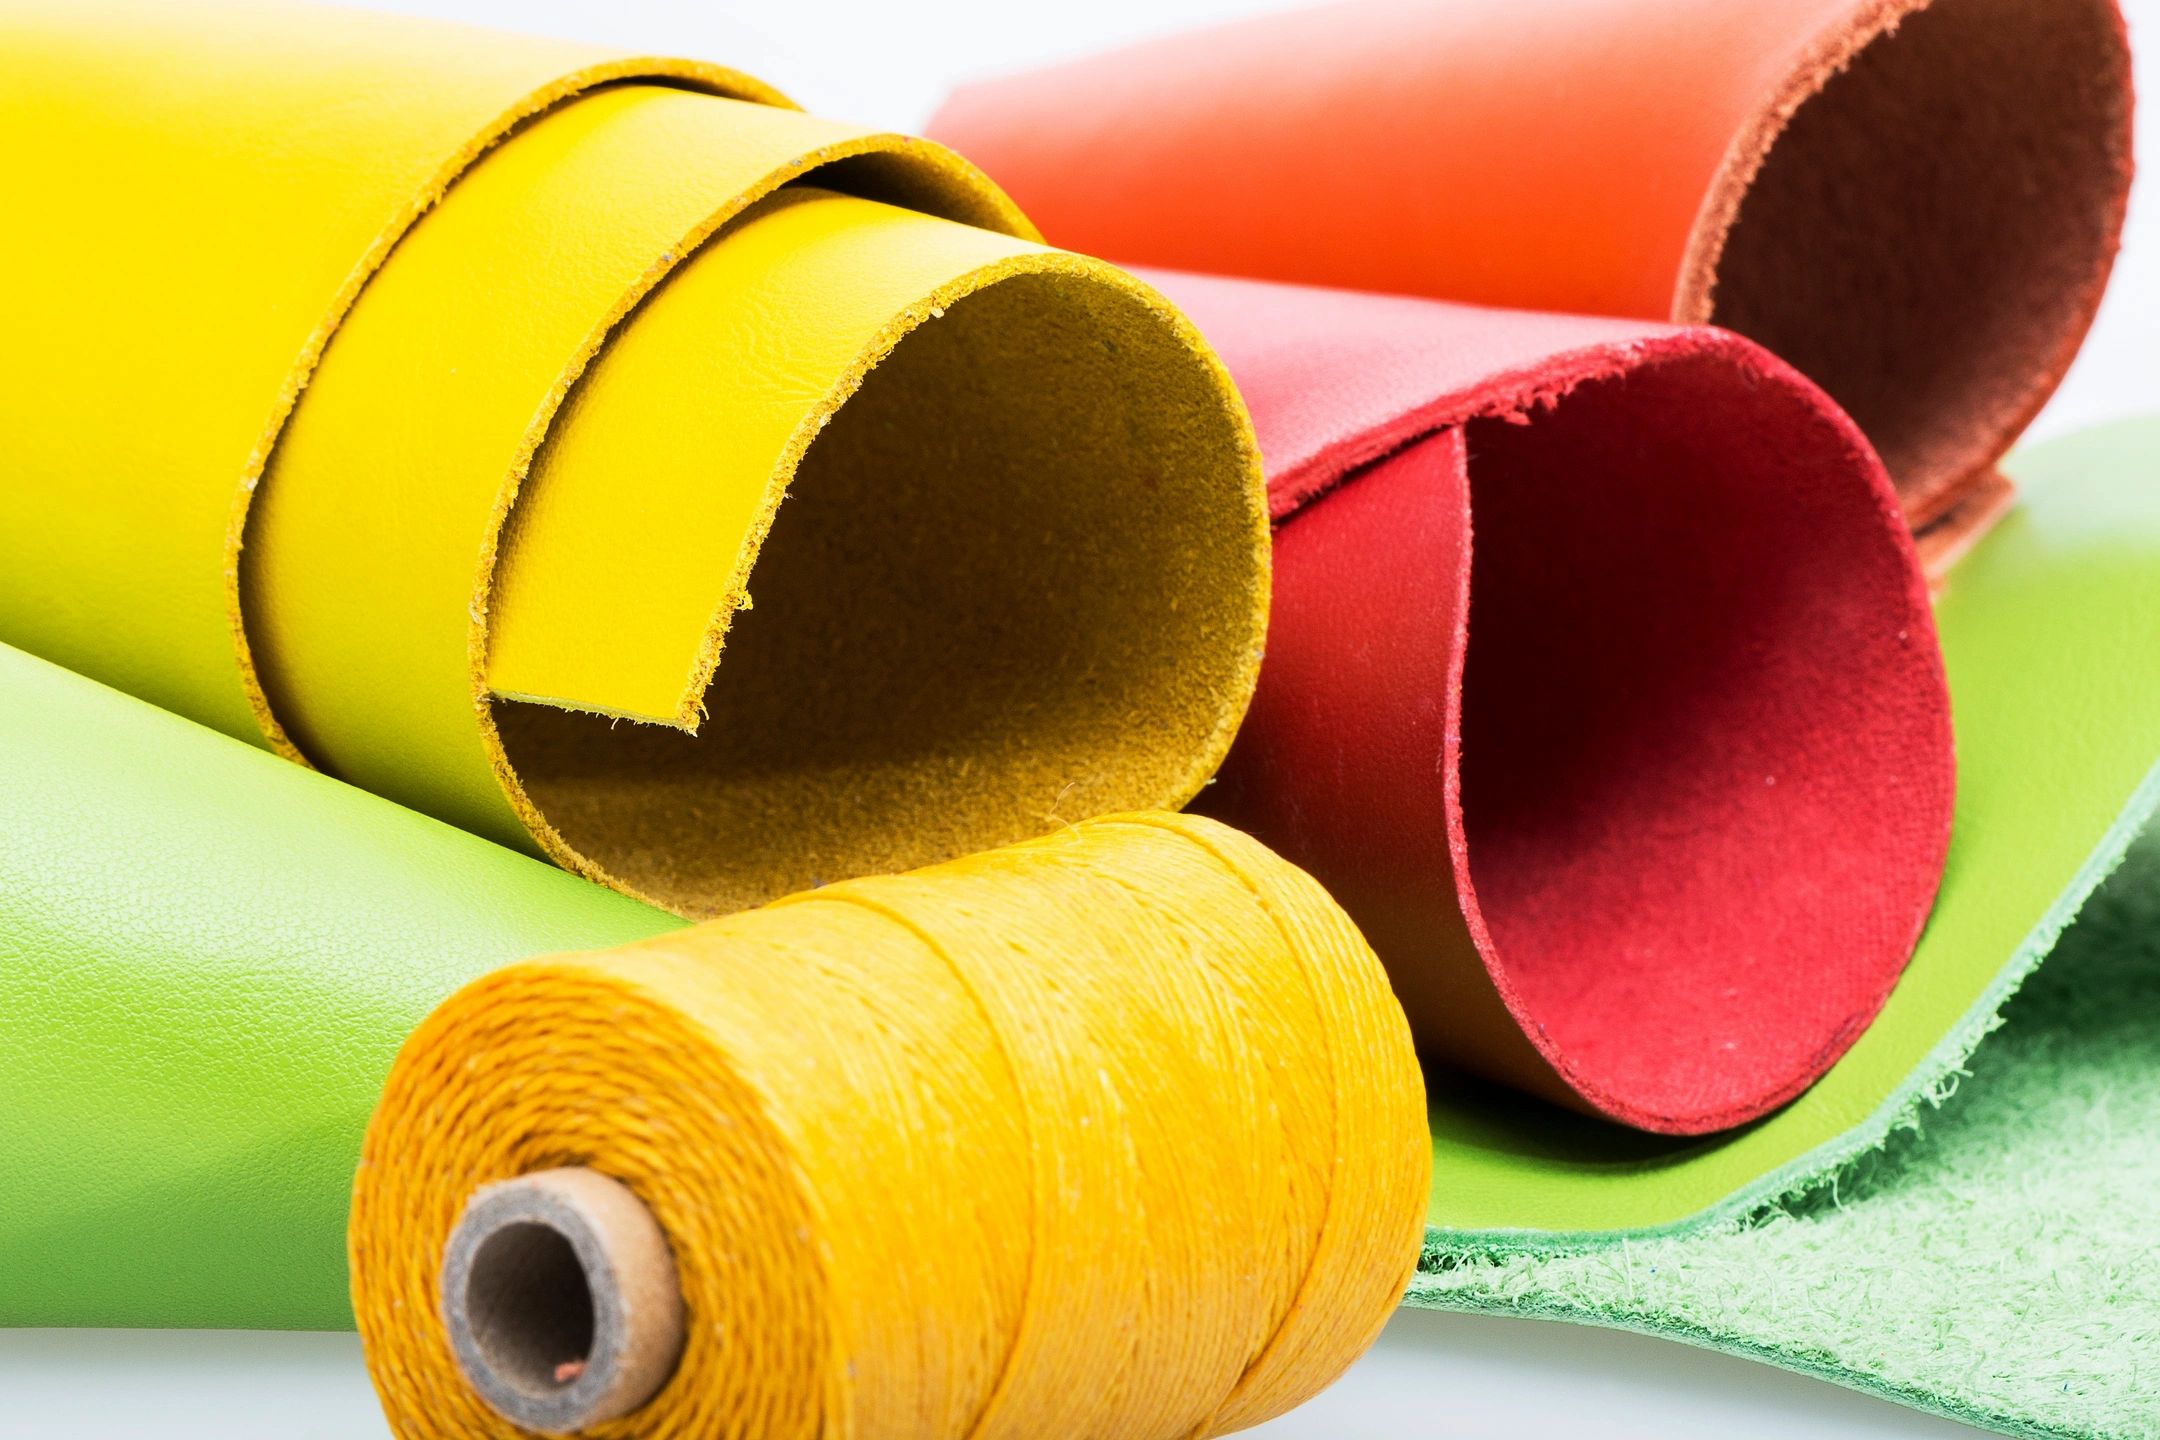 A photo of rolls of upholstery fabric and thread in yellow, orange and red.